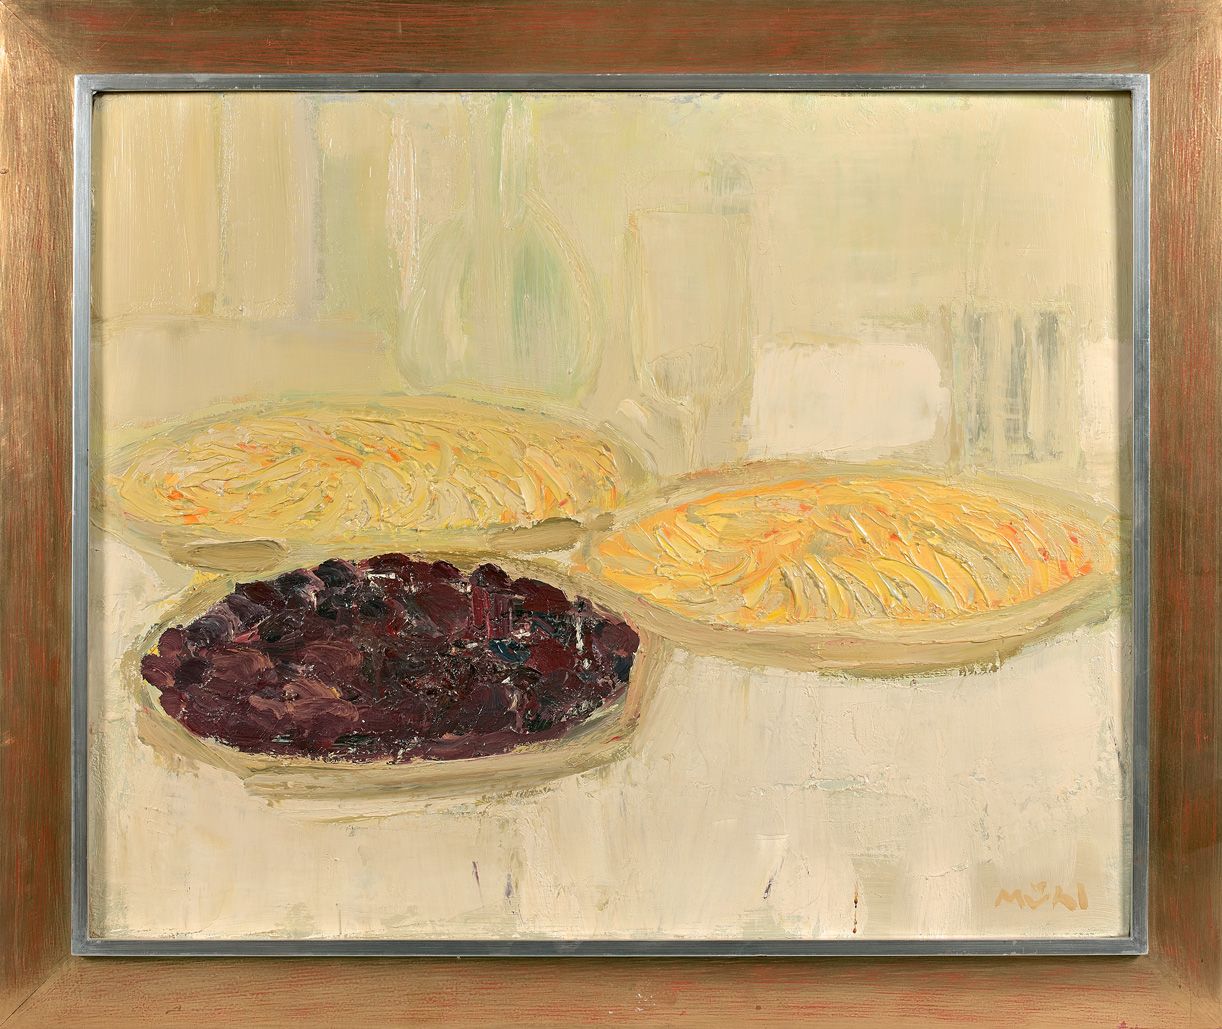 MÜHL Roger MÜHL (1929-2008)

Fruit tarts

Canvas signed lower right, titled on t&hellip;